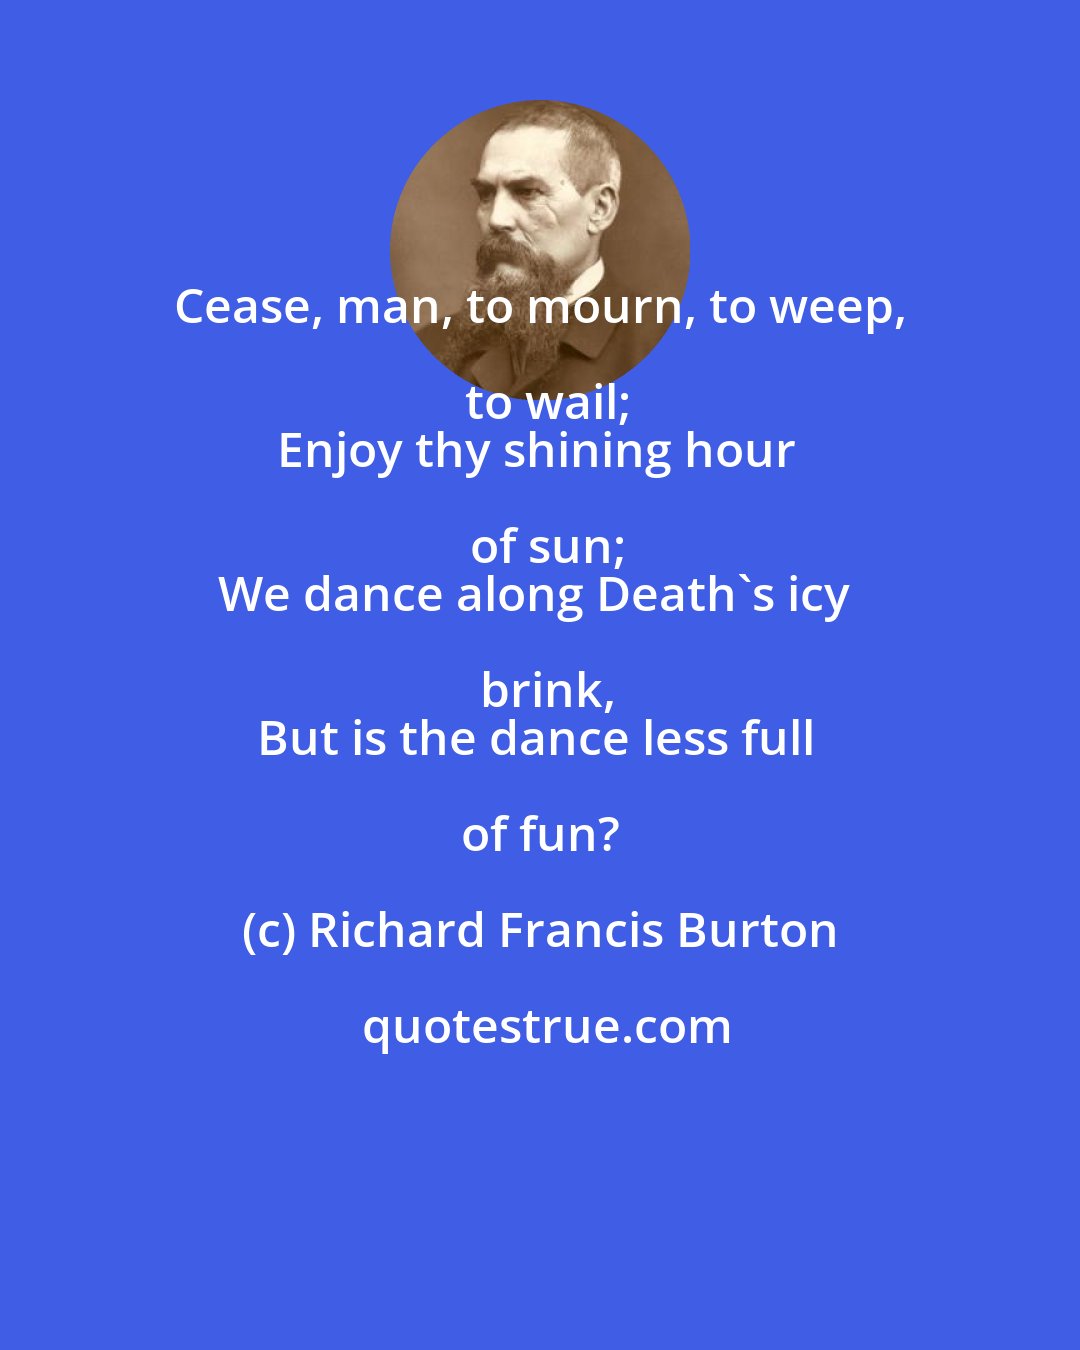 Richard Francis Burton: Cease, man, to mourn, to weep, to wail;
Enjoy thy shining hour of sun;
We dance along Death's icy brink,
But is the dance less full of fun?